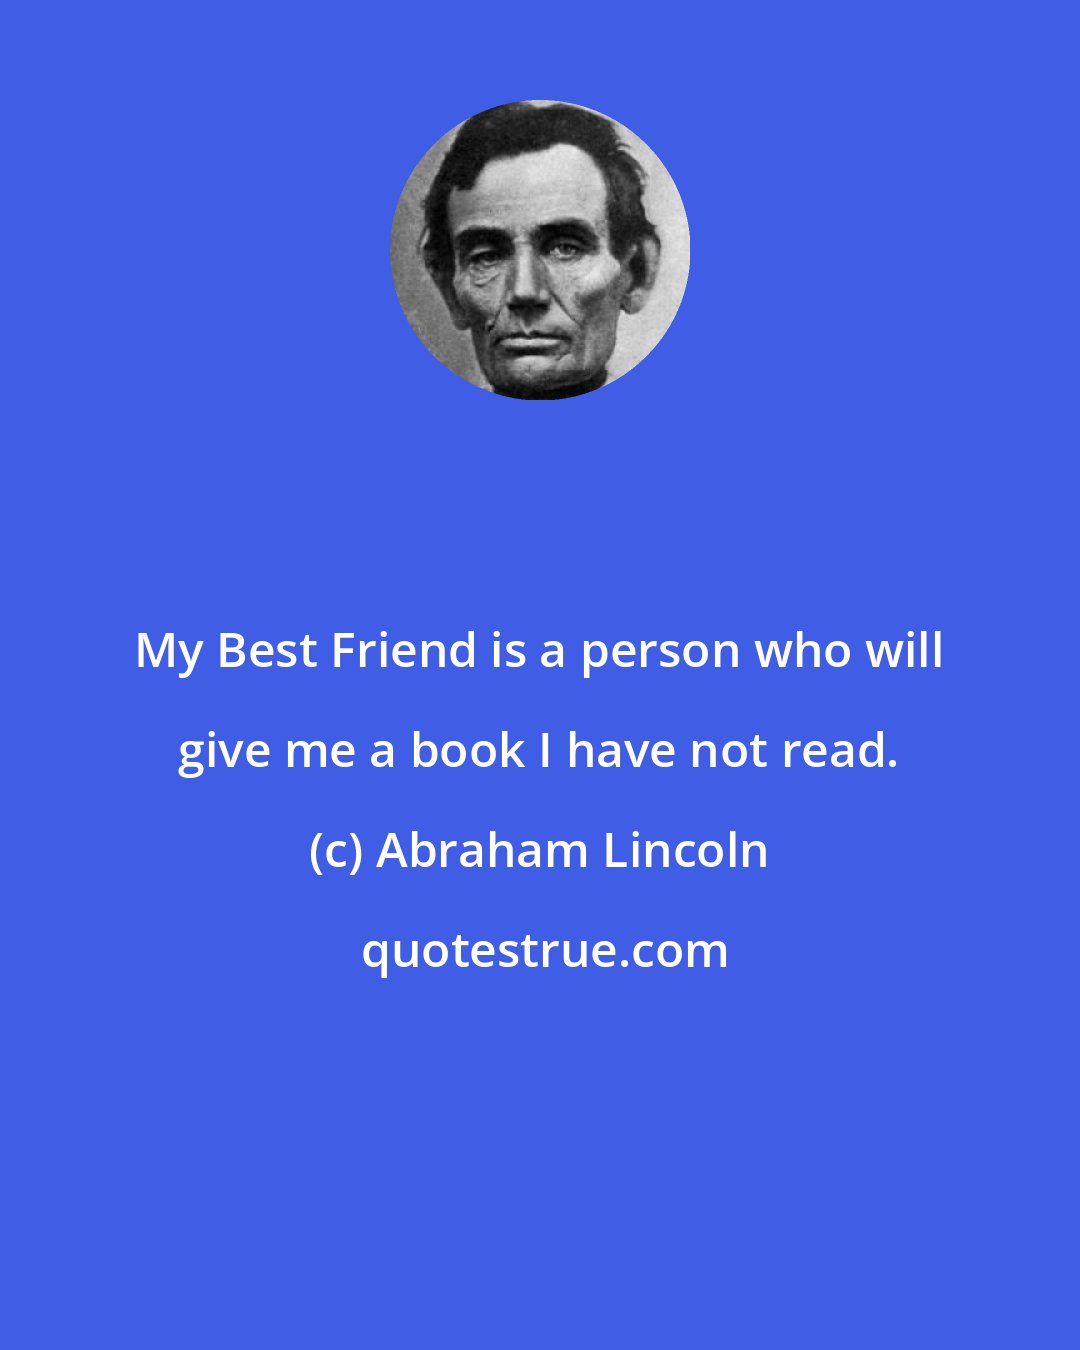 Abraham Lincoln: My Best Friend is a person who will give me a book I have not read.